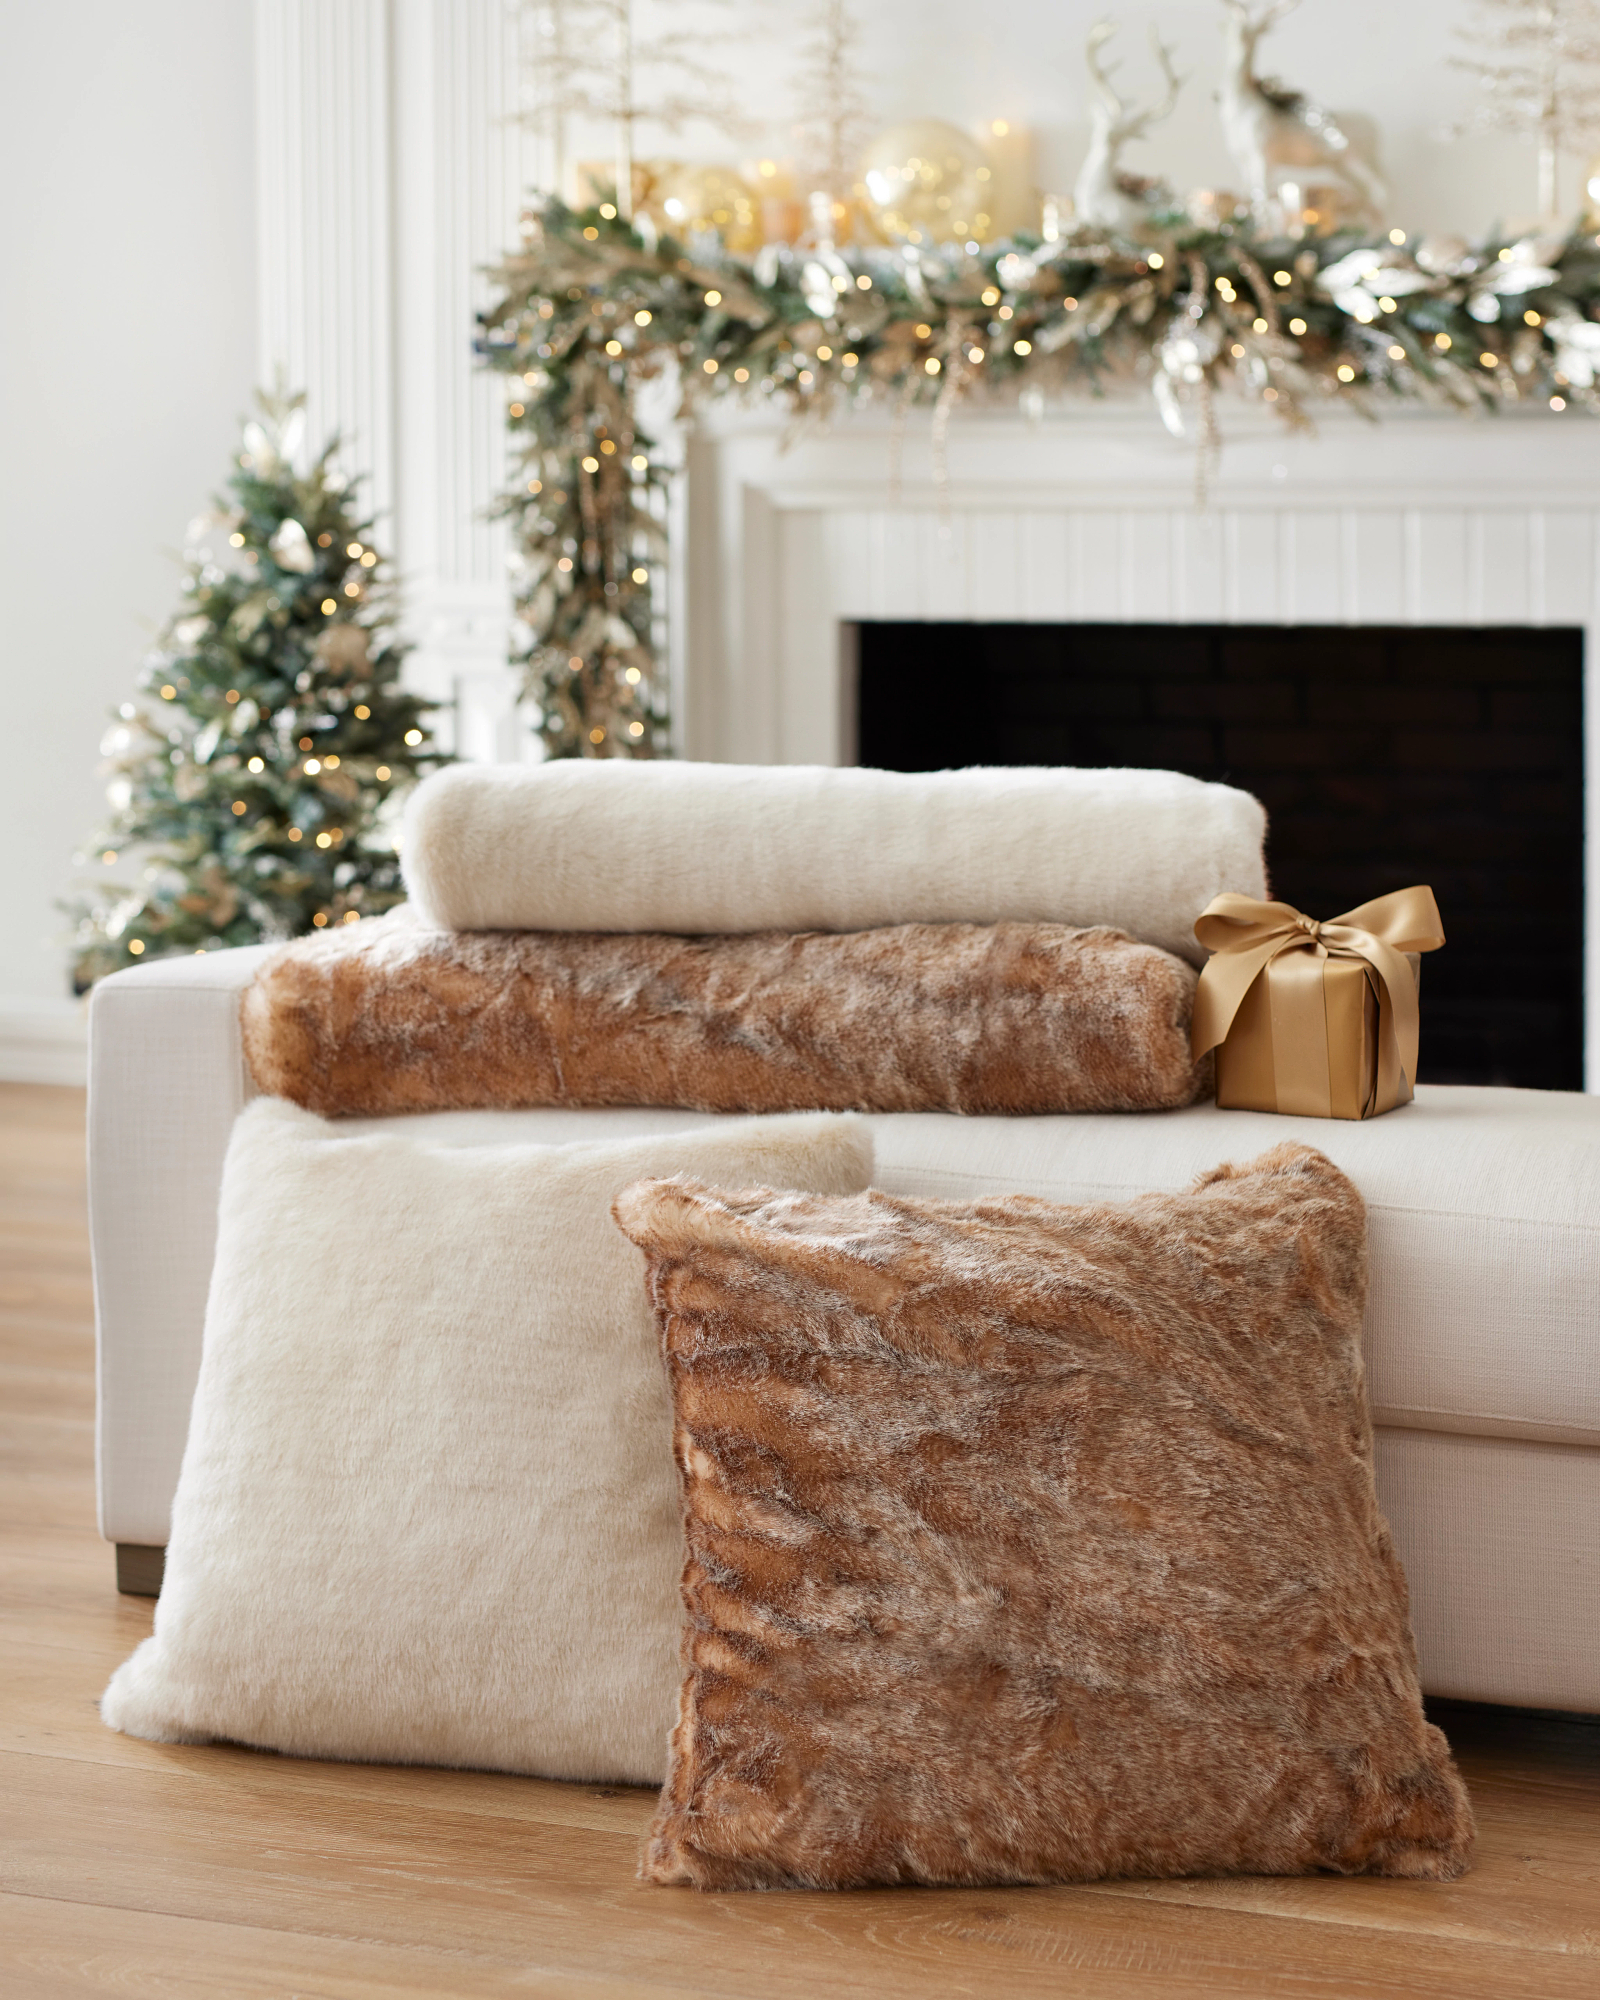 Ivory Faux Fur Holiday Decorative Throw Pillow Cover 23x23 + Reviews